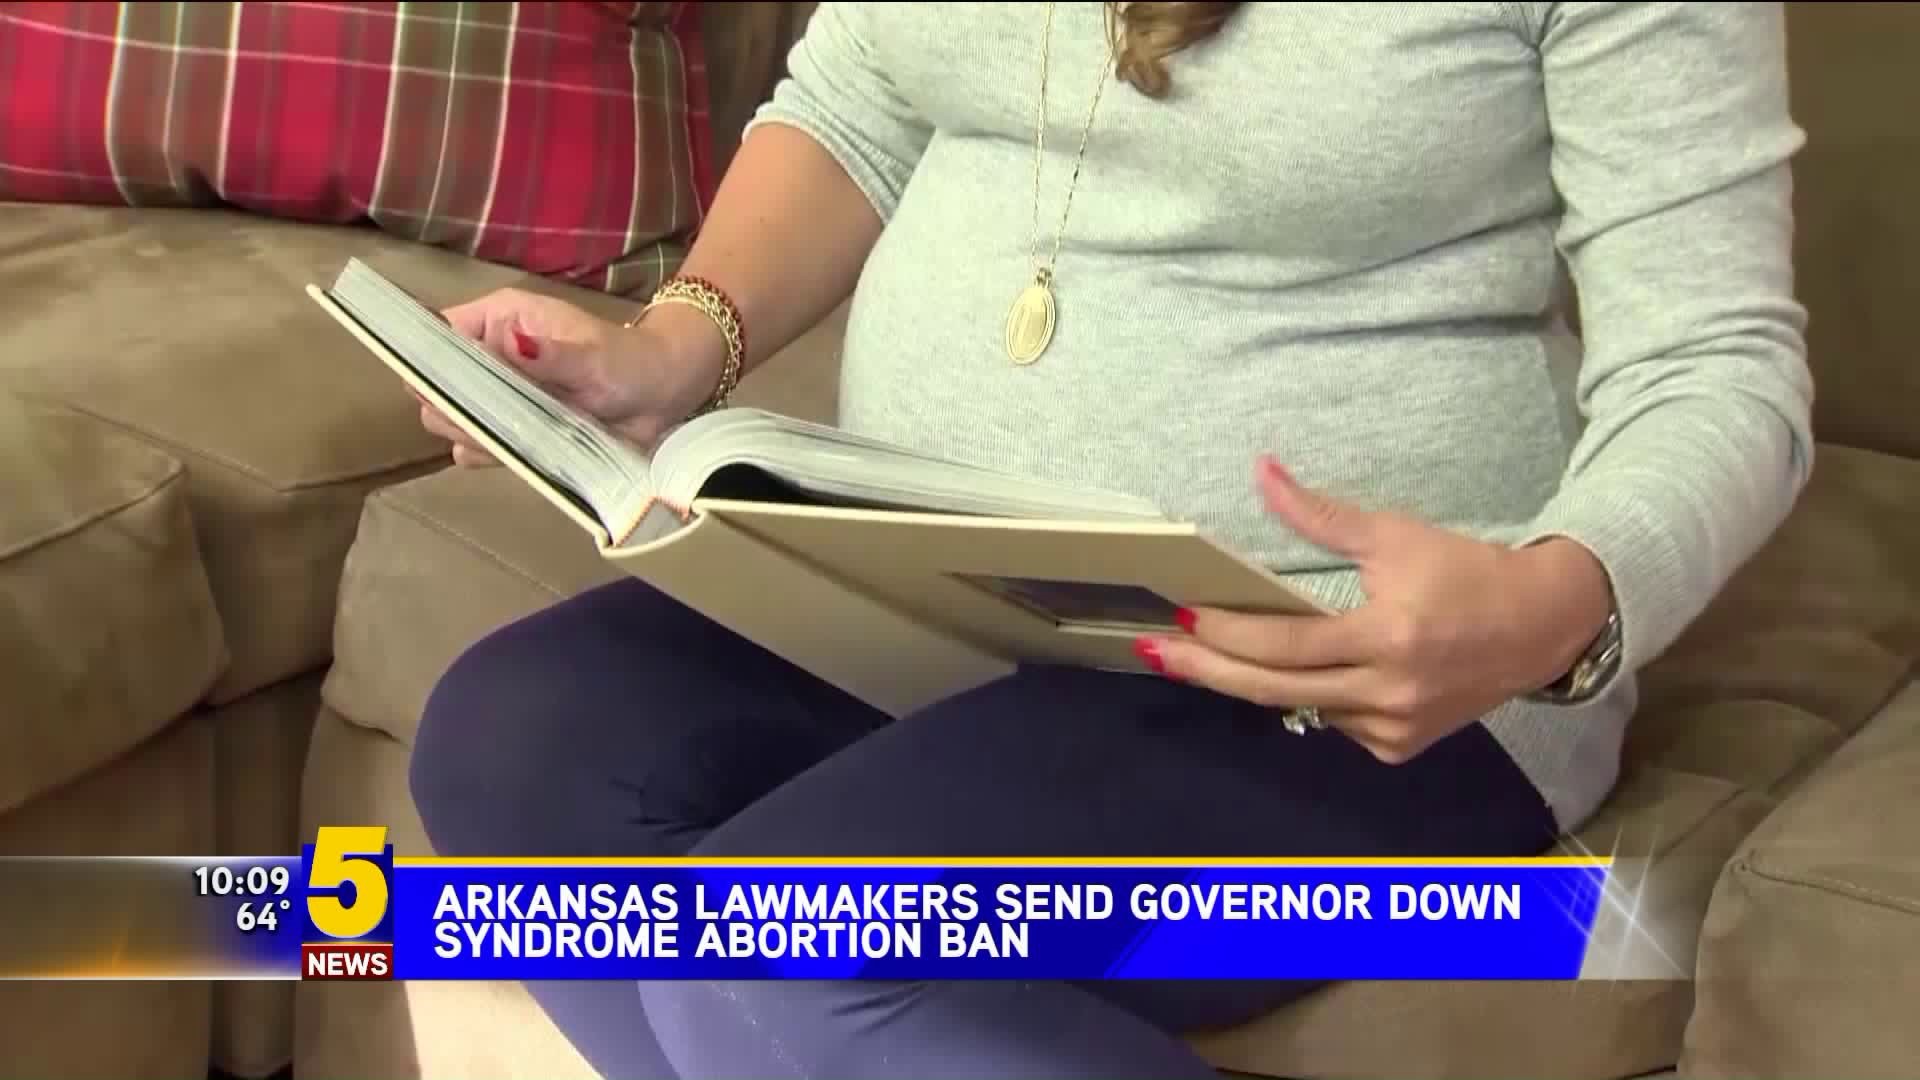 Arkansas Lawmakers Send Governor Down Syndrome Abortion Ban